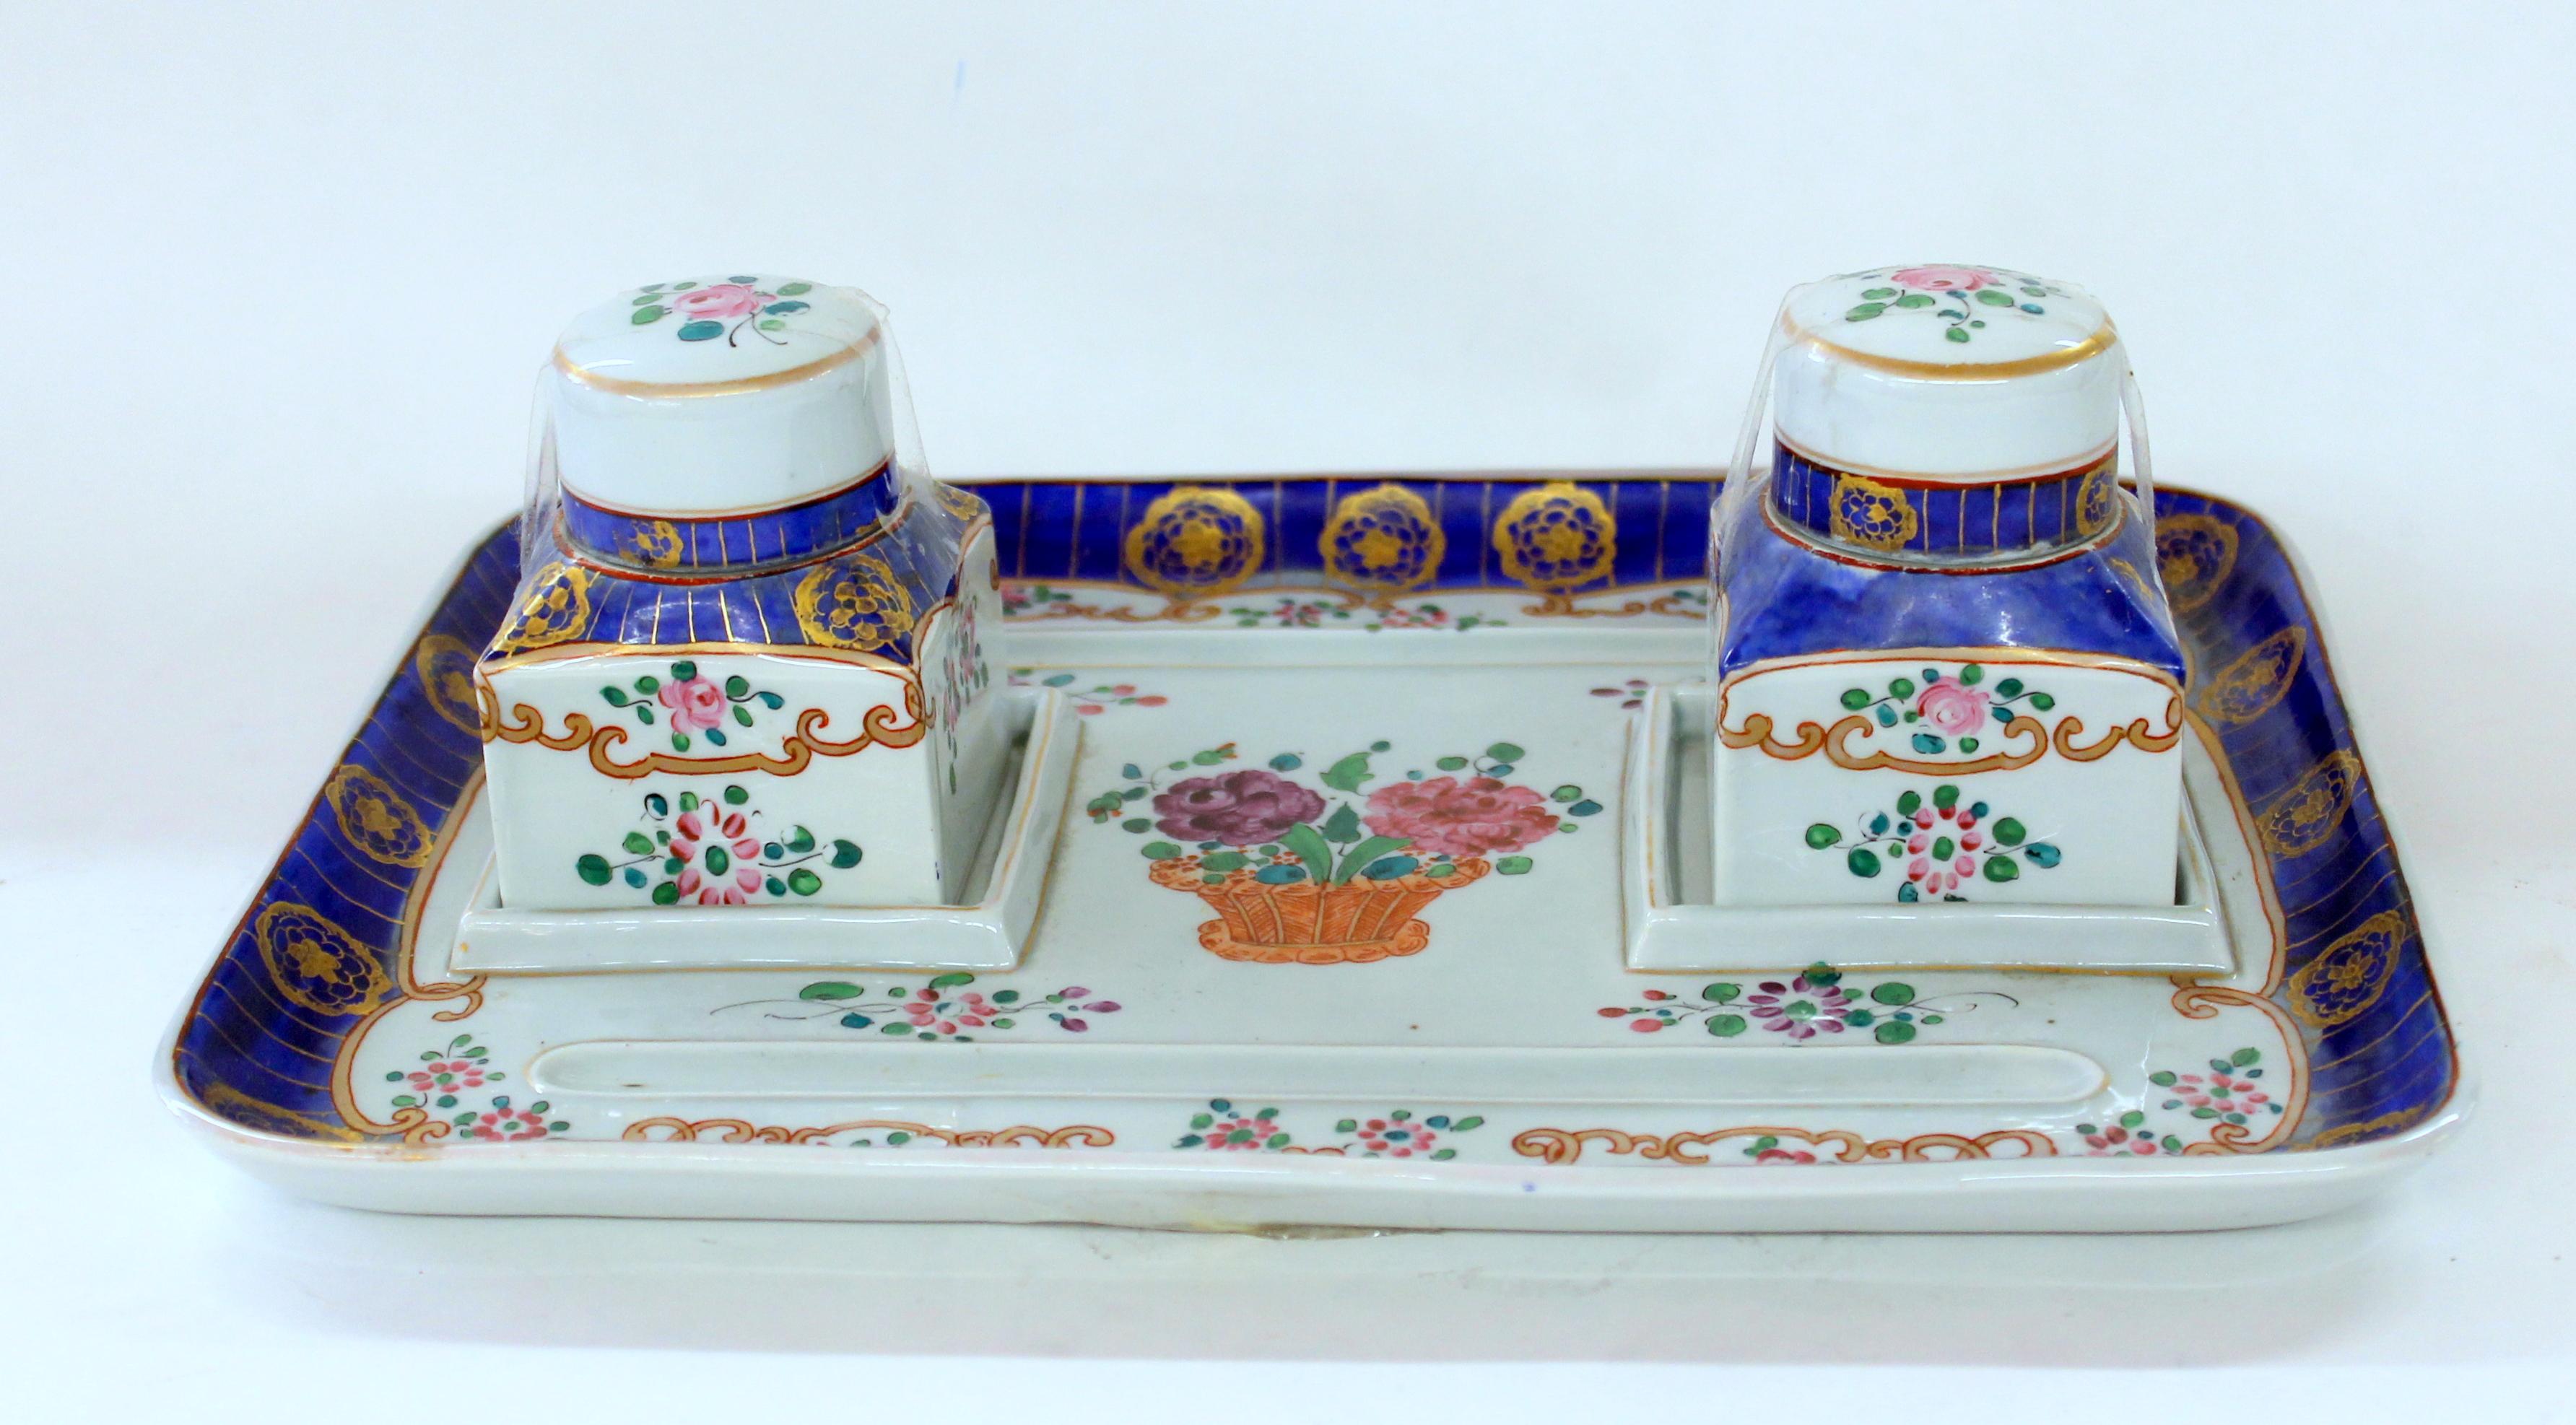 Rare Old French Samson-style hand-painted porcelain large two-bottle Inkstand with typical 